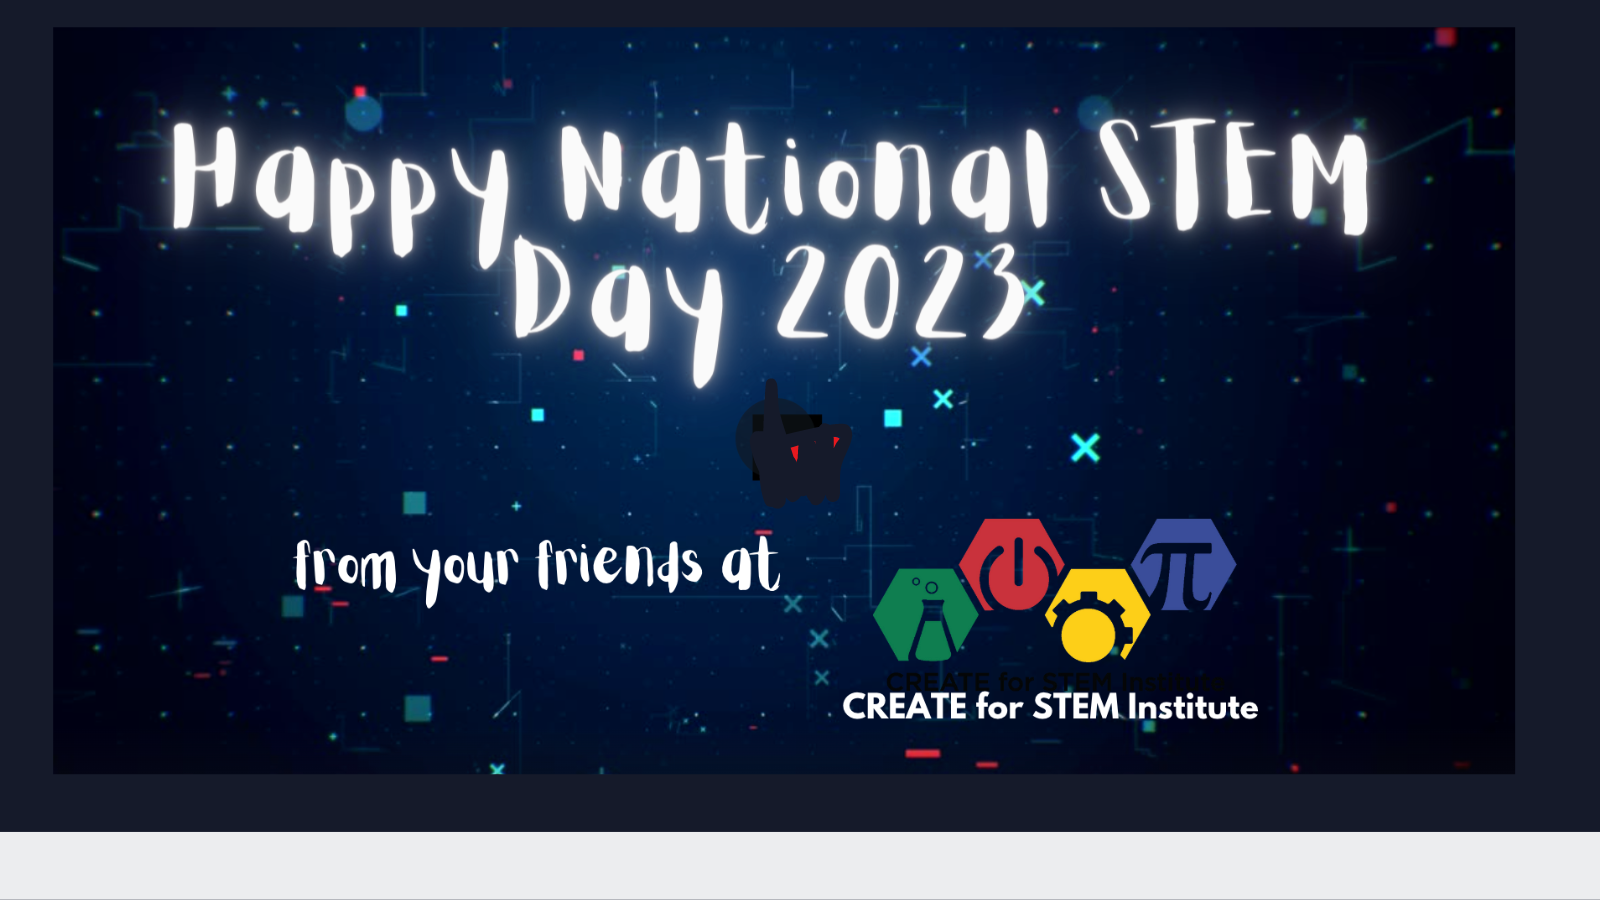 Happy National STEM Day 2023 from you friends at CREATE for STEM